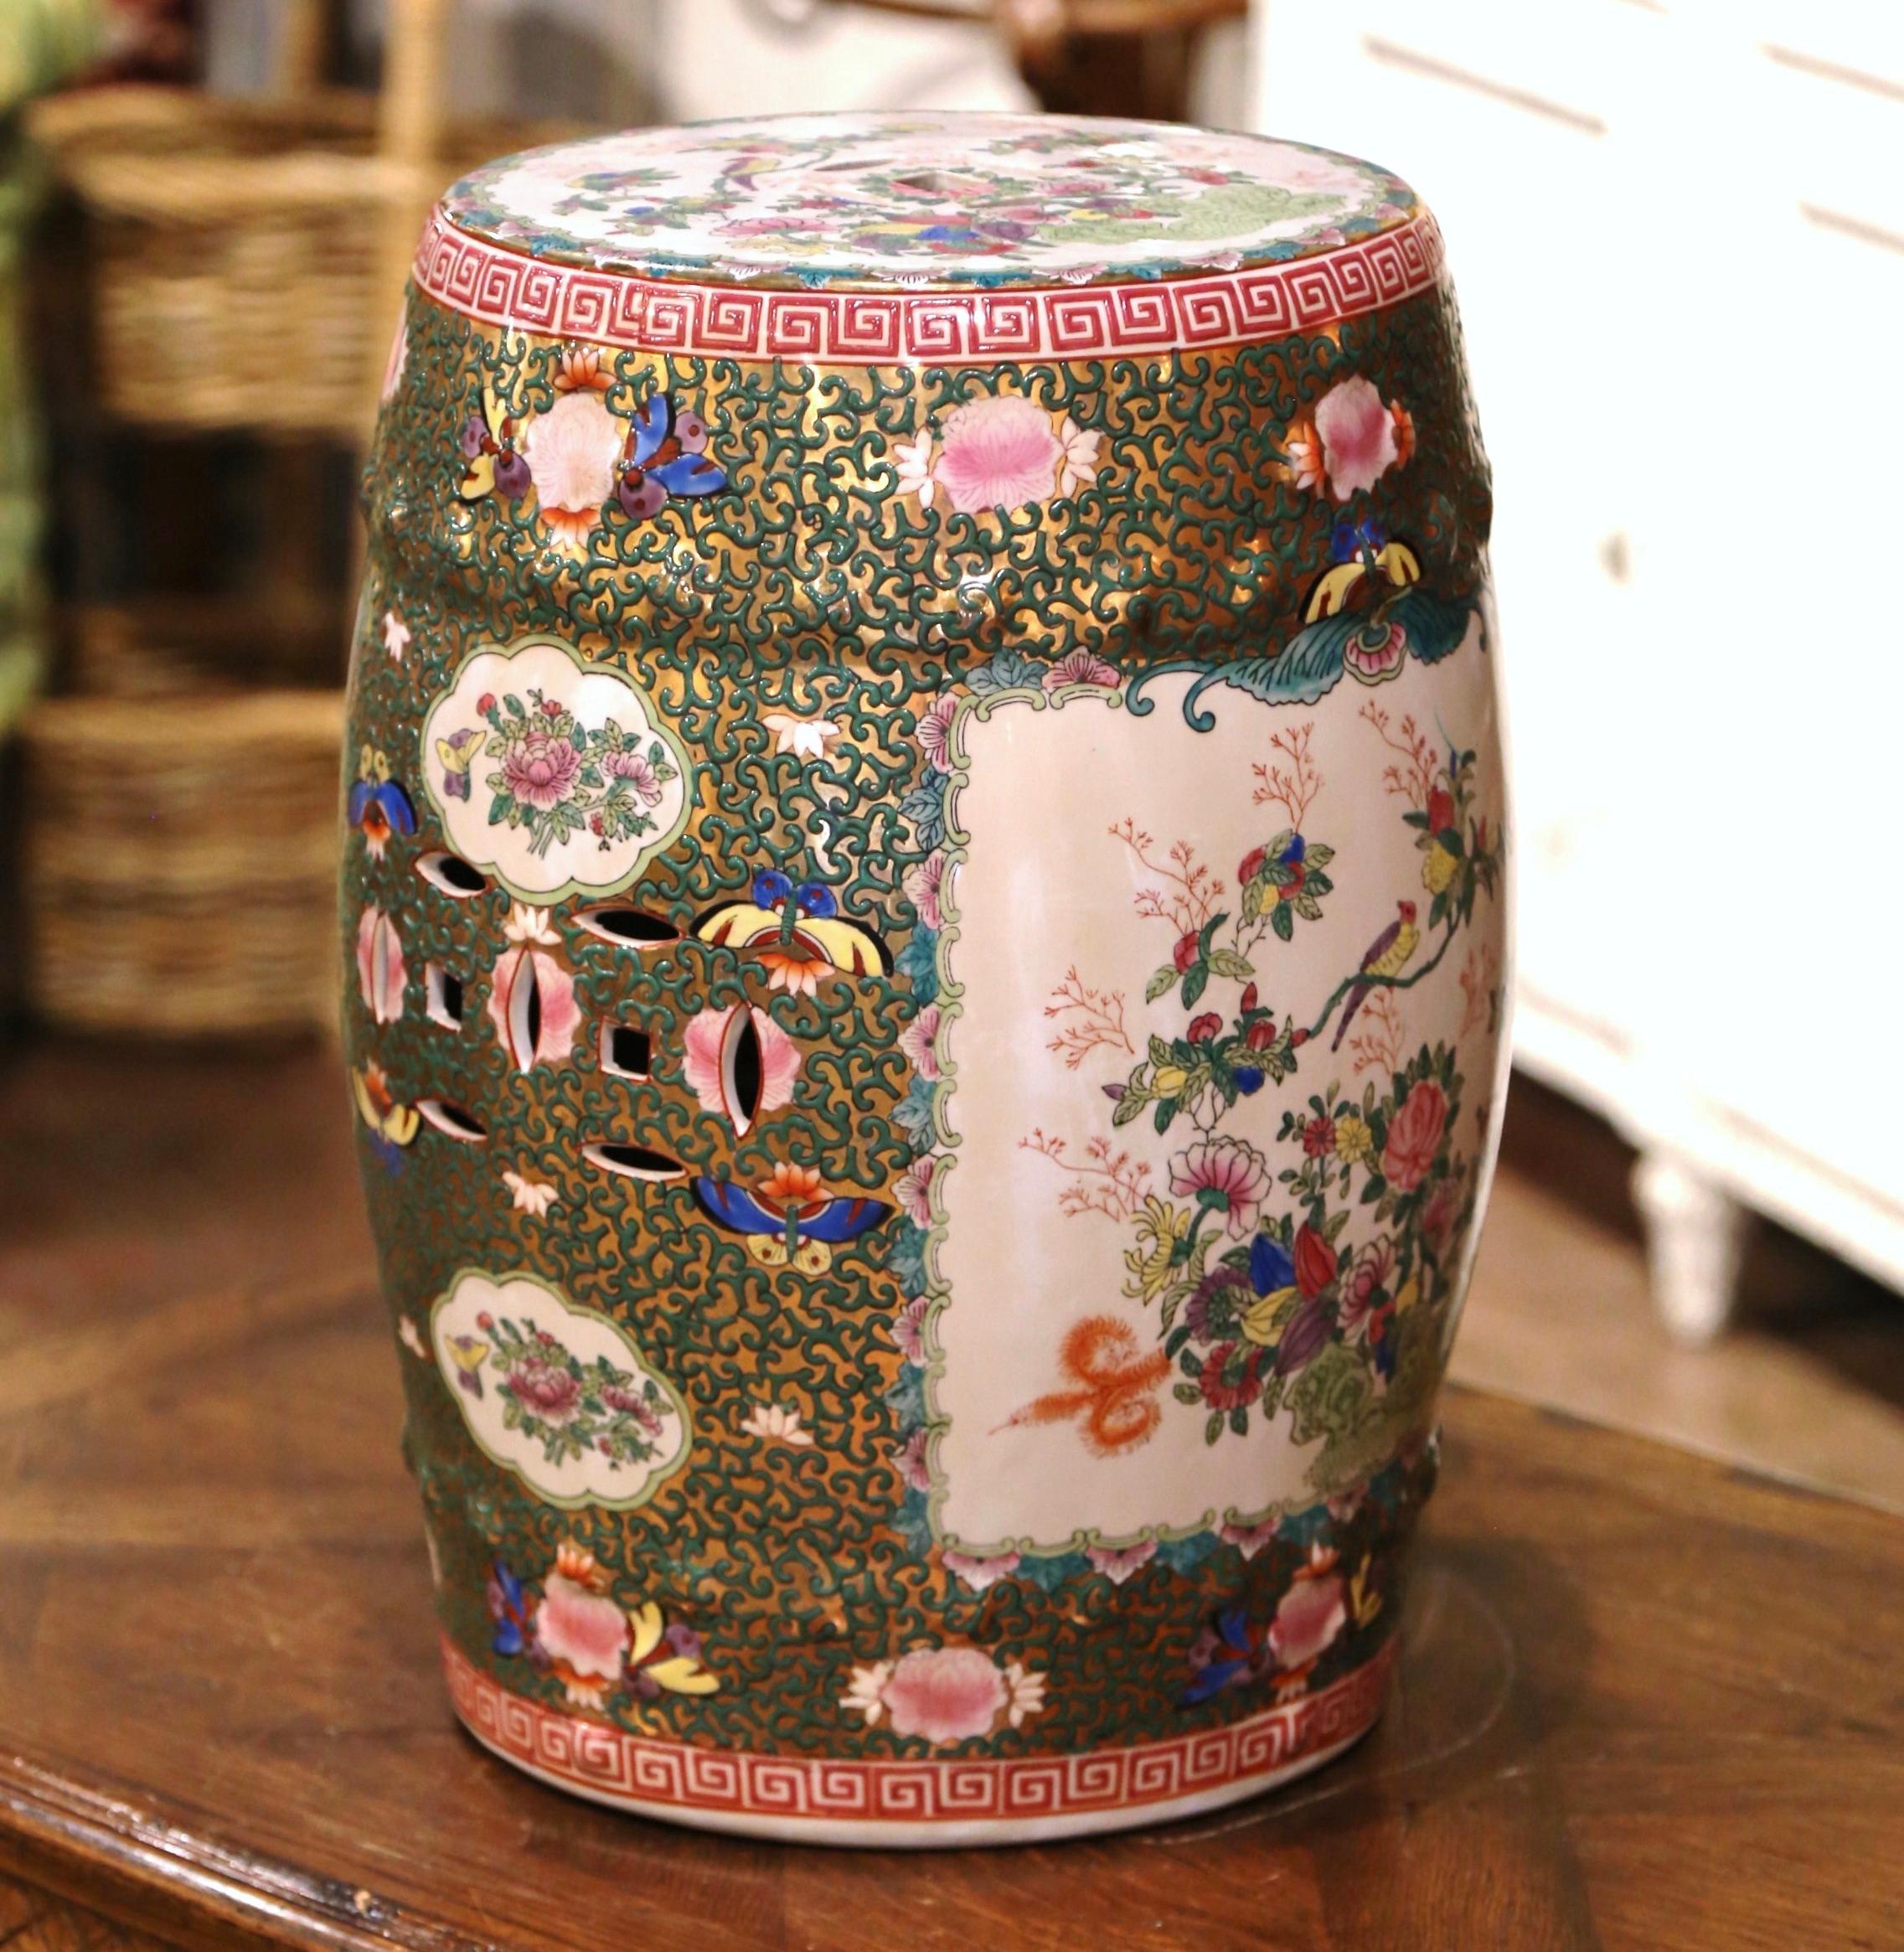 Decorate a den or a living room with this colorful vintage garden stool. Created in China, circa 1950 and round in shape, the porcelain seat is pierced on the top and around the perimeter for an intricate, sculptural effect. The exotic Asian stool